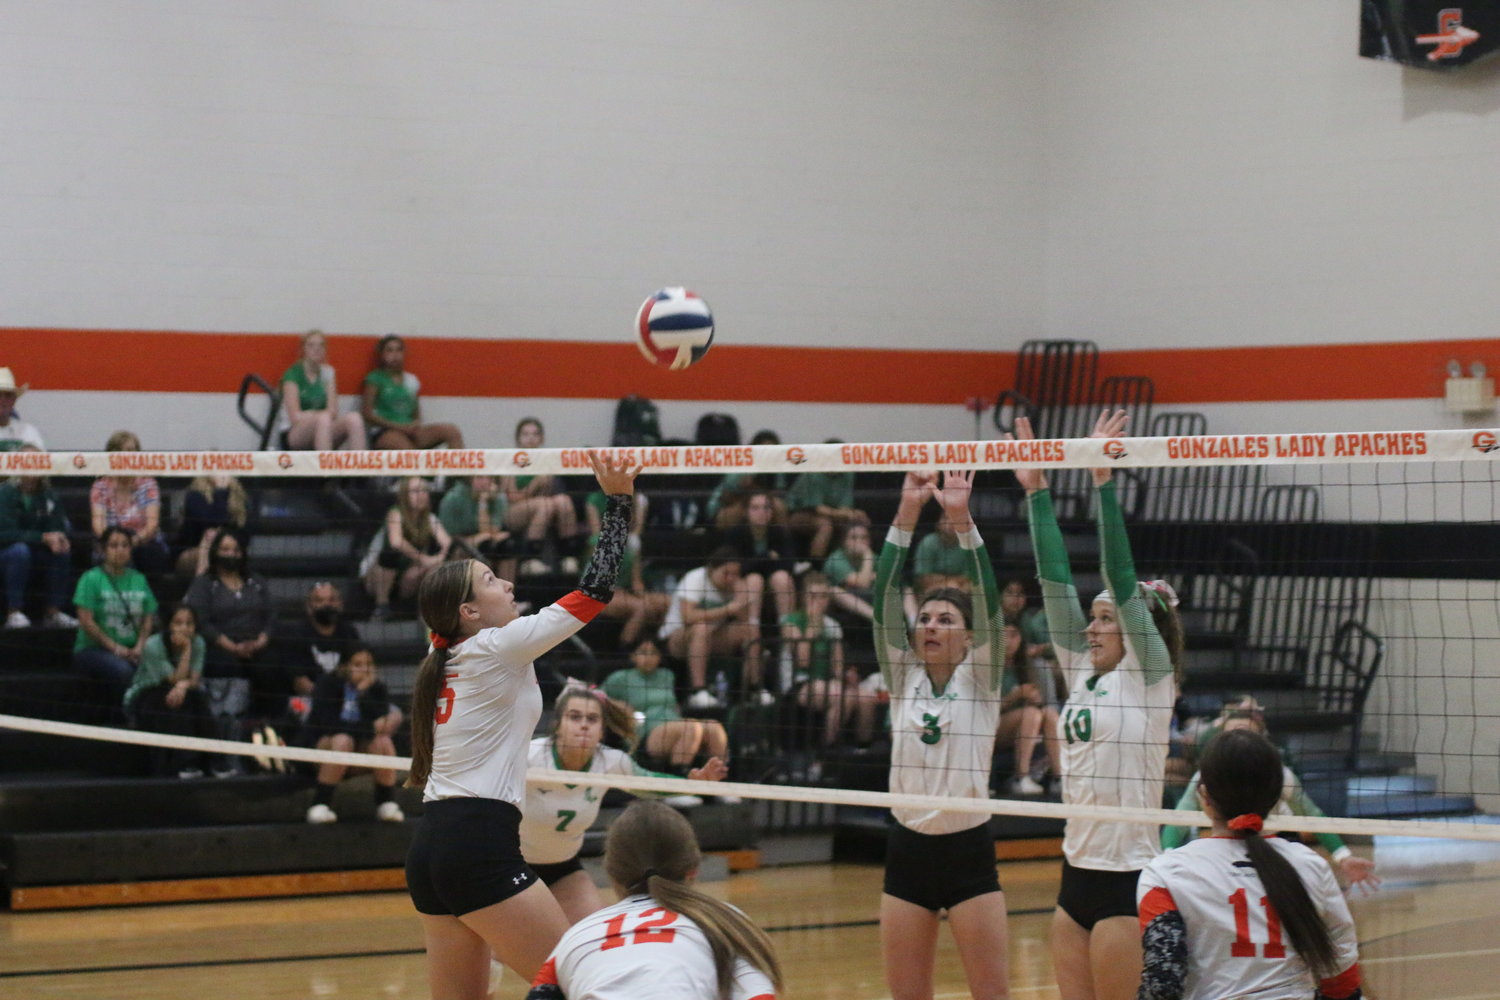 Sydney McCray (5) tries to catch Pleasanton off balance with a dink while Macy Sample (12) and Tara Lester (11) look on.